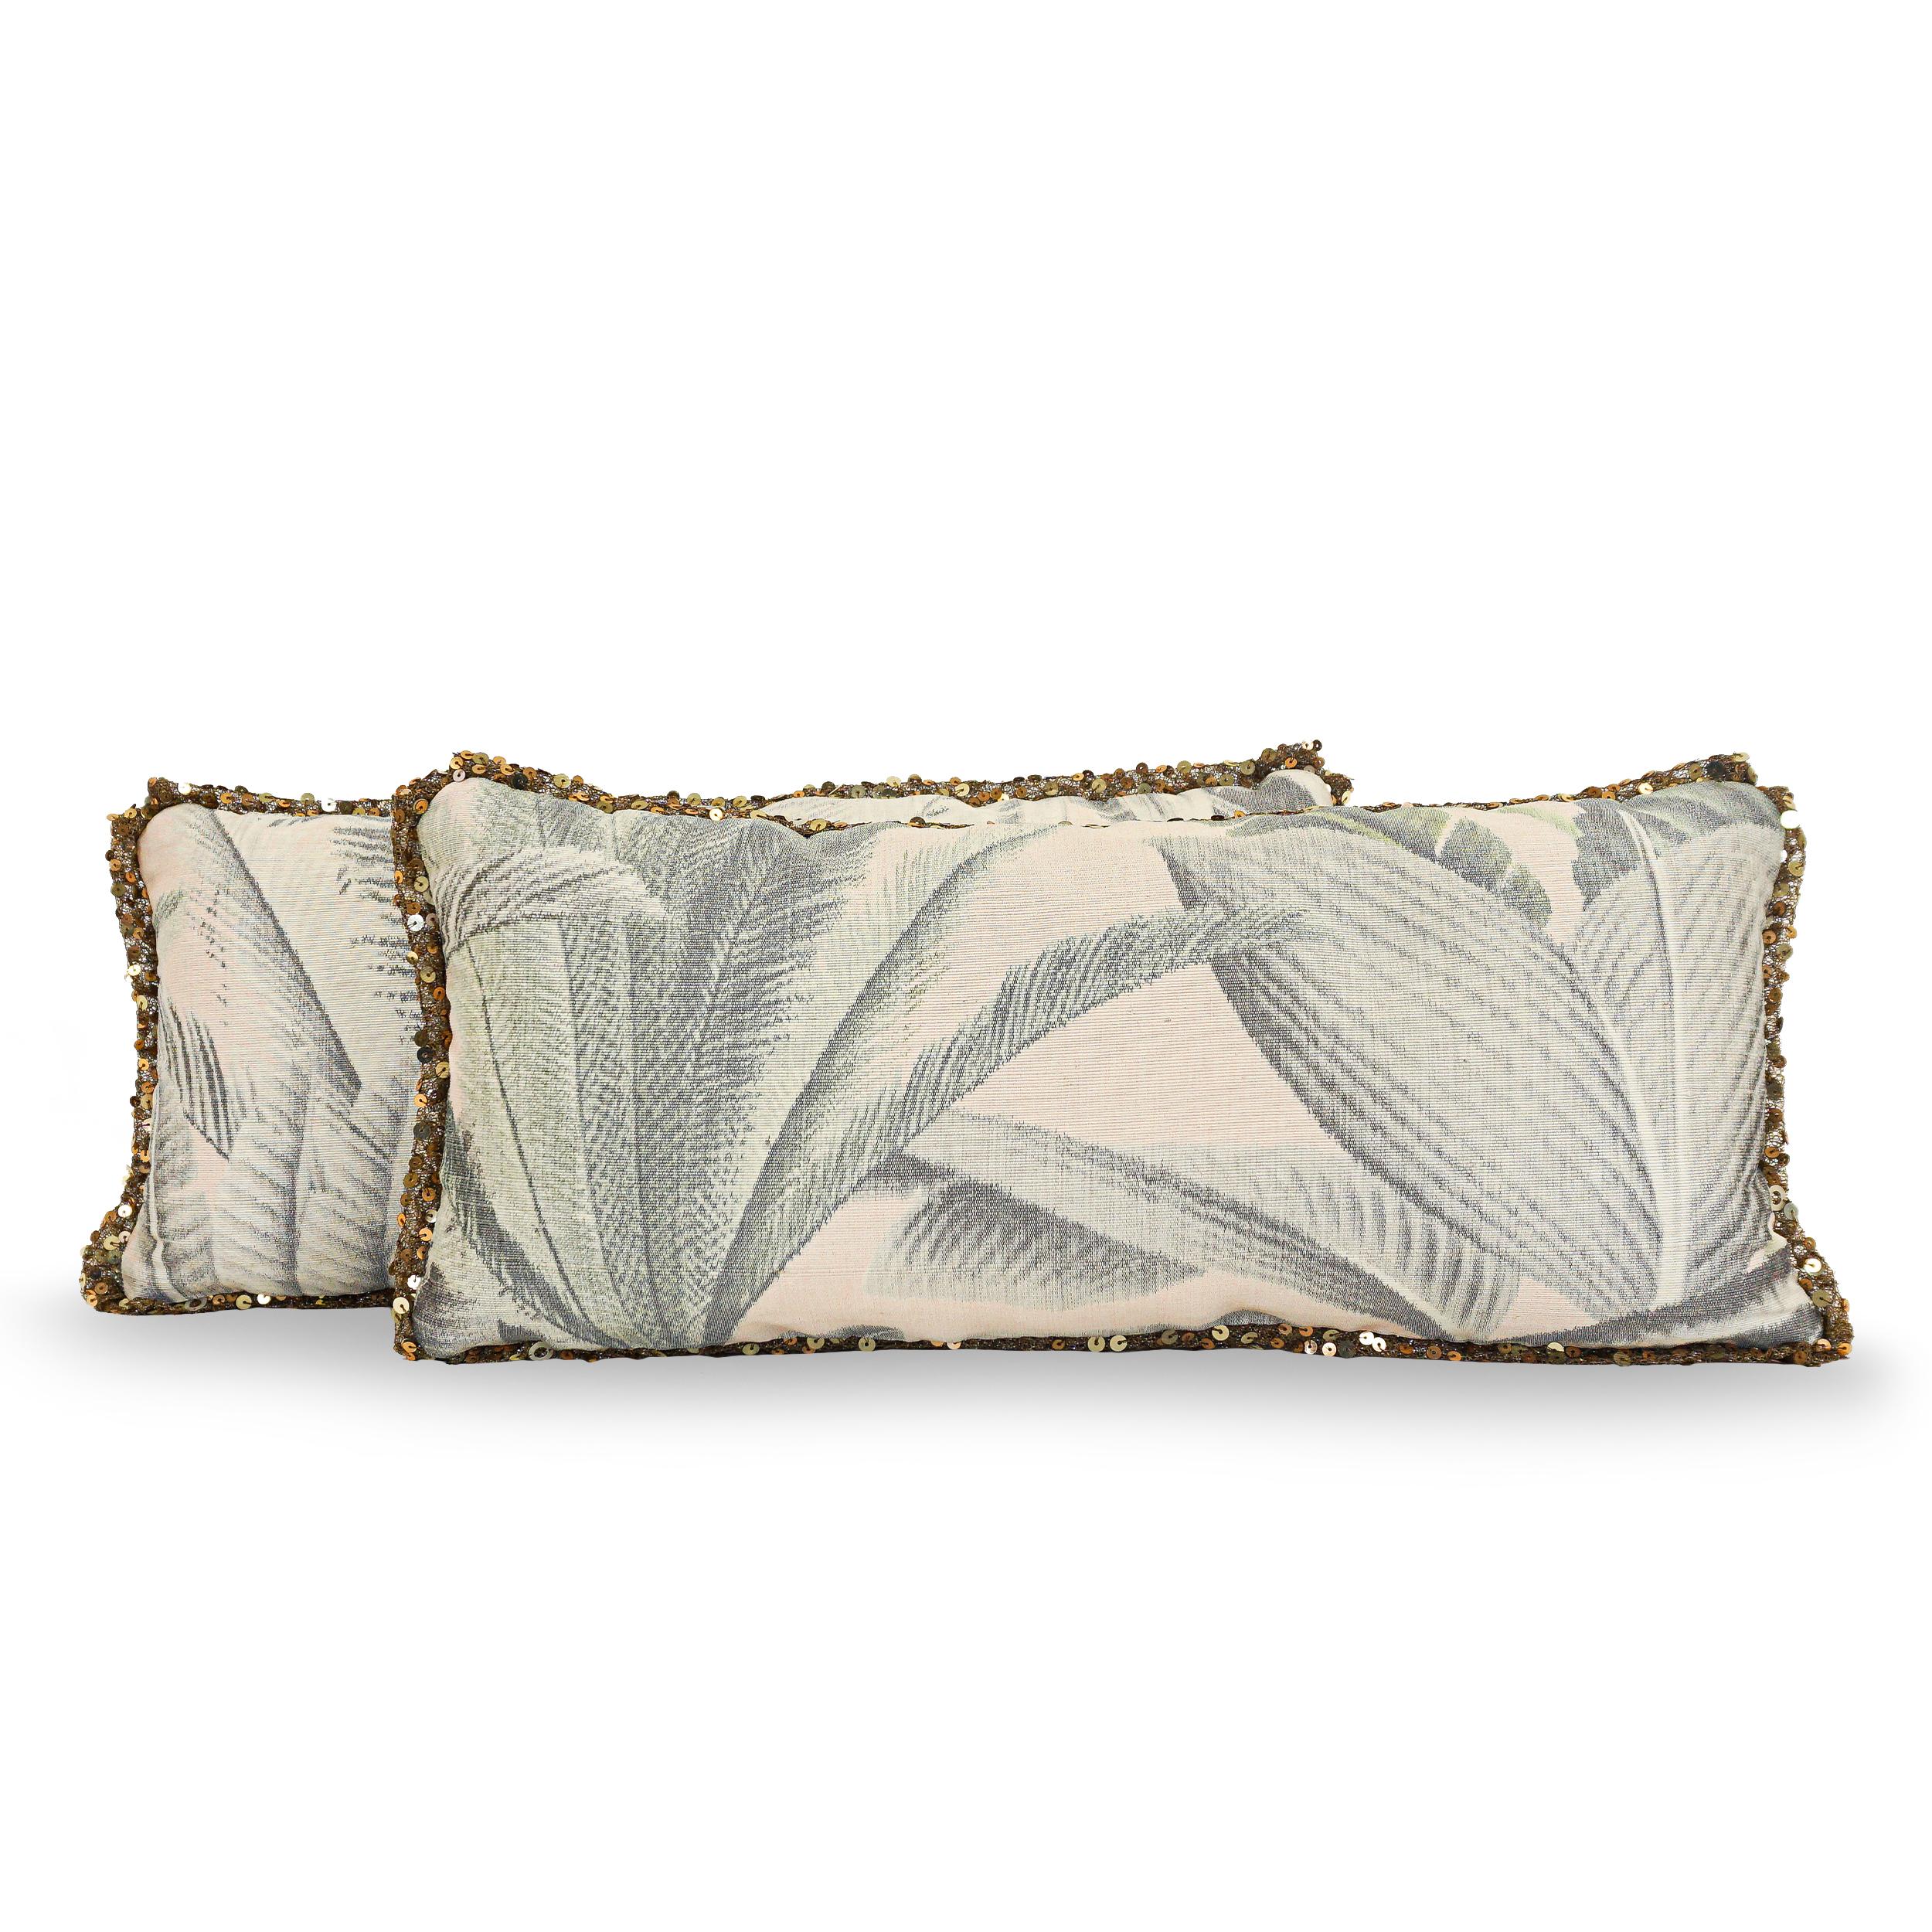 Down/feather stuffed Lumbar Pillows. Covered in a luxurious combination of fabrics; a palm print on a creamy silk ground on the front and a woven silver leather on the back. Trimmed with a decadent gold sequin. Can be customized in combination of